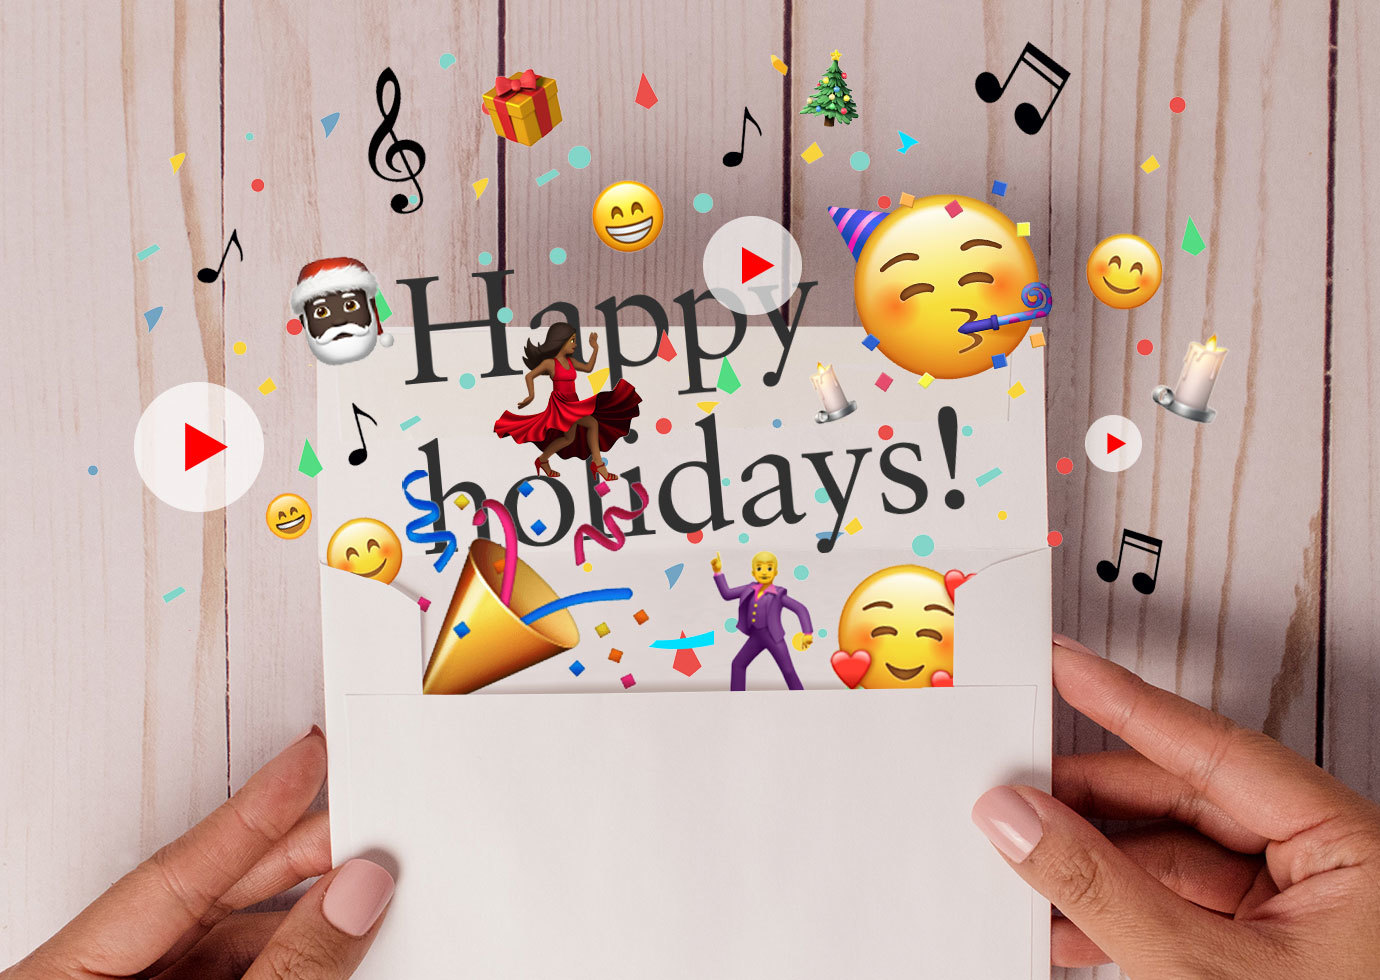 Corporate holiday ecards: 4 best practices - Thinkso